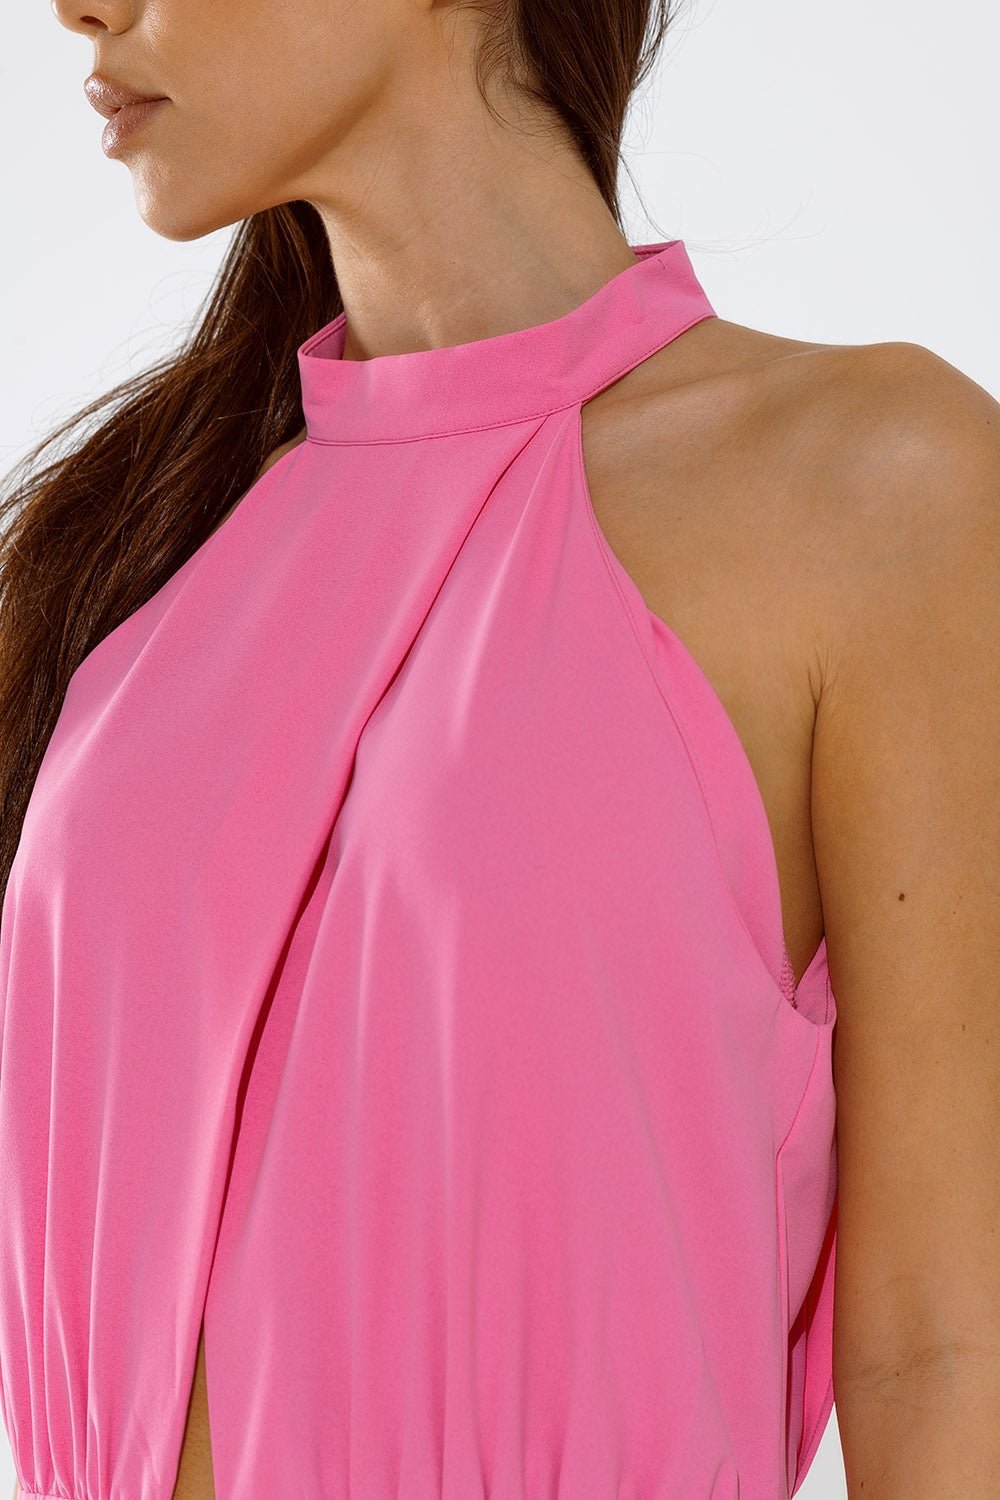 Pink Jumpuits With Top Crossed and High Collar - Mack & Harvie